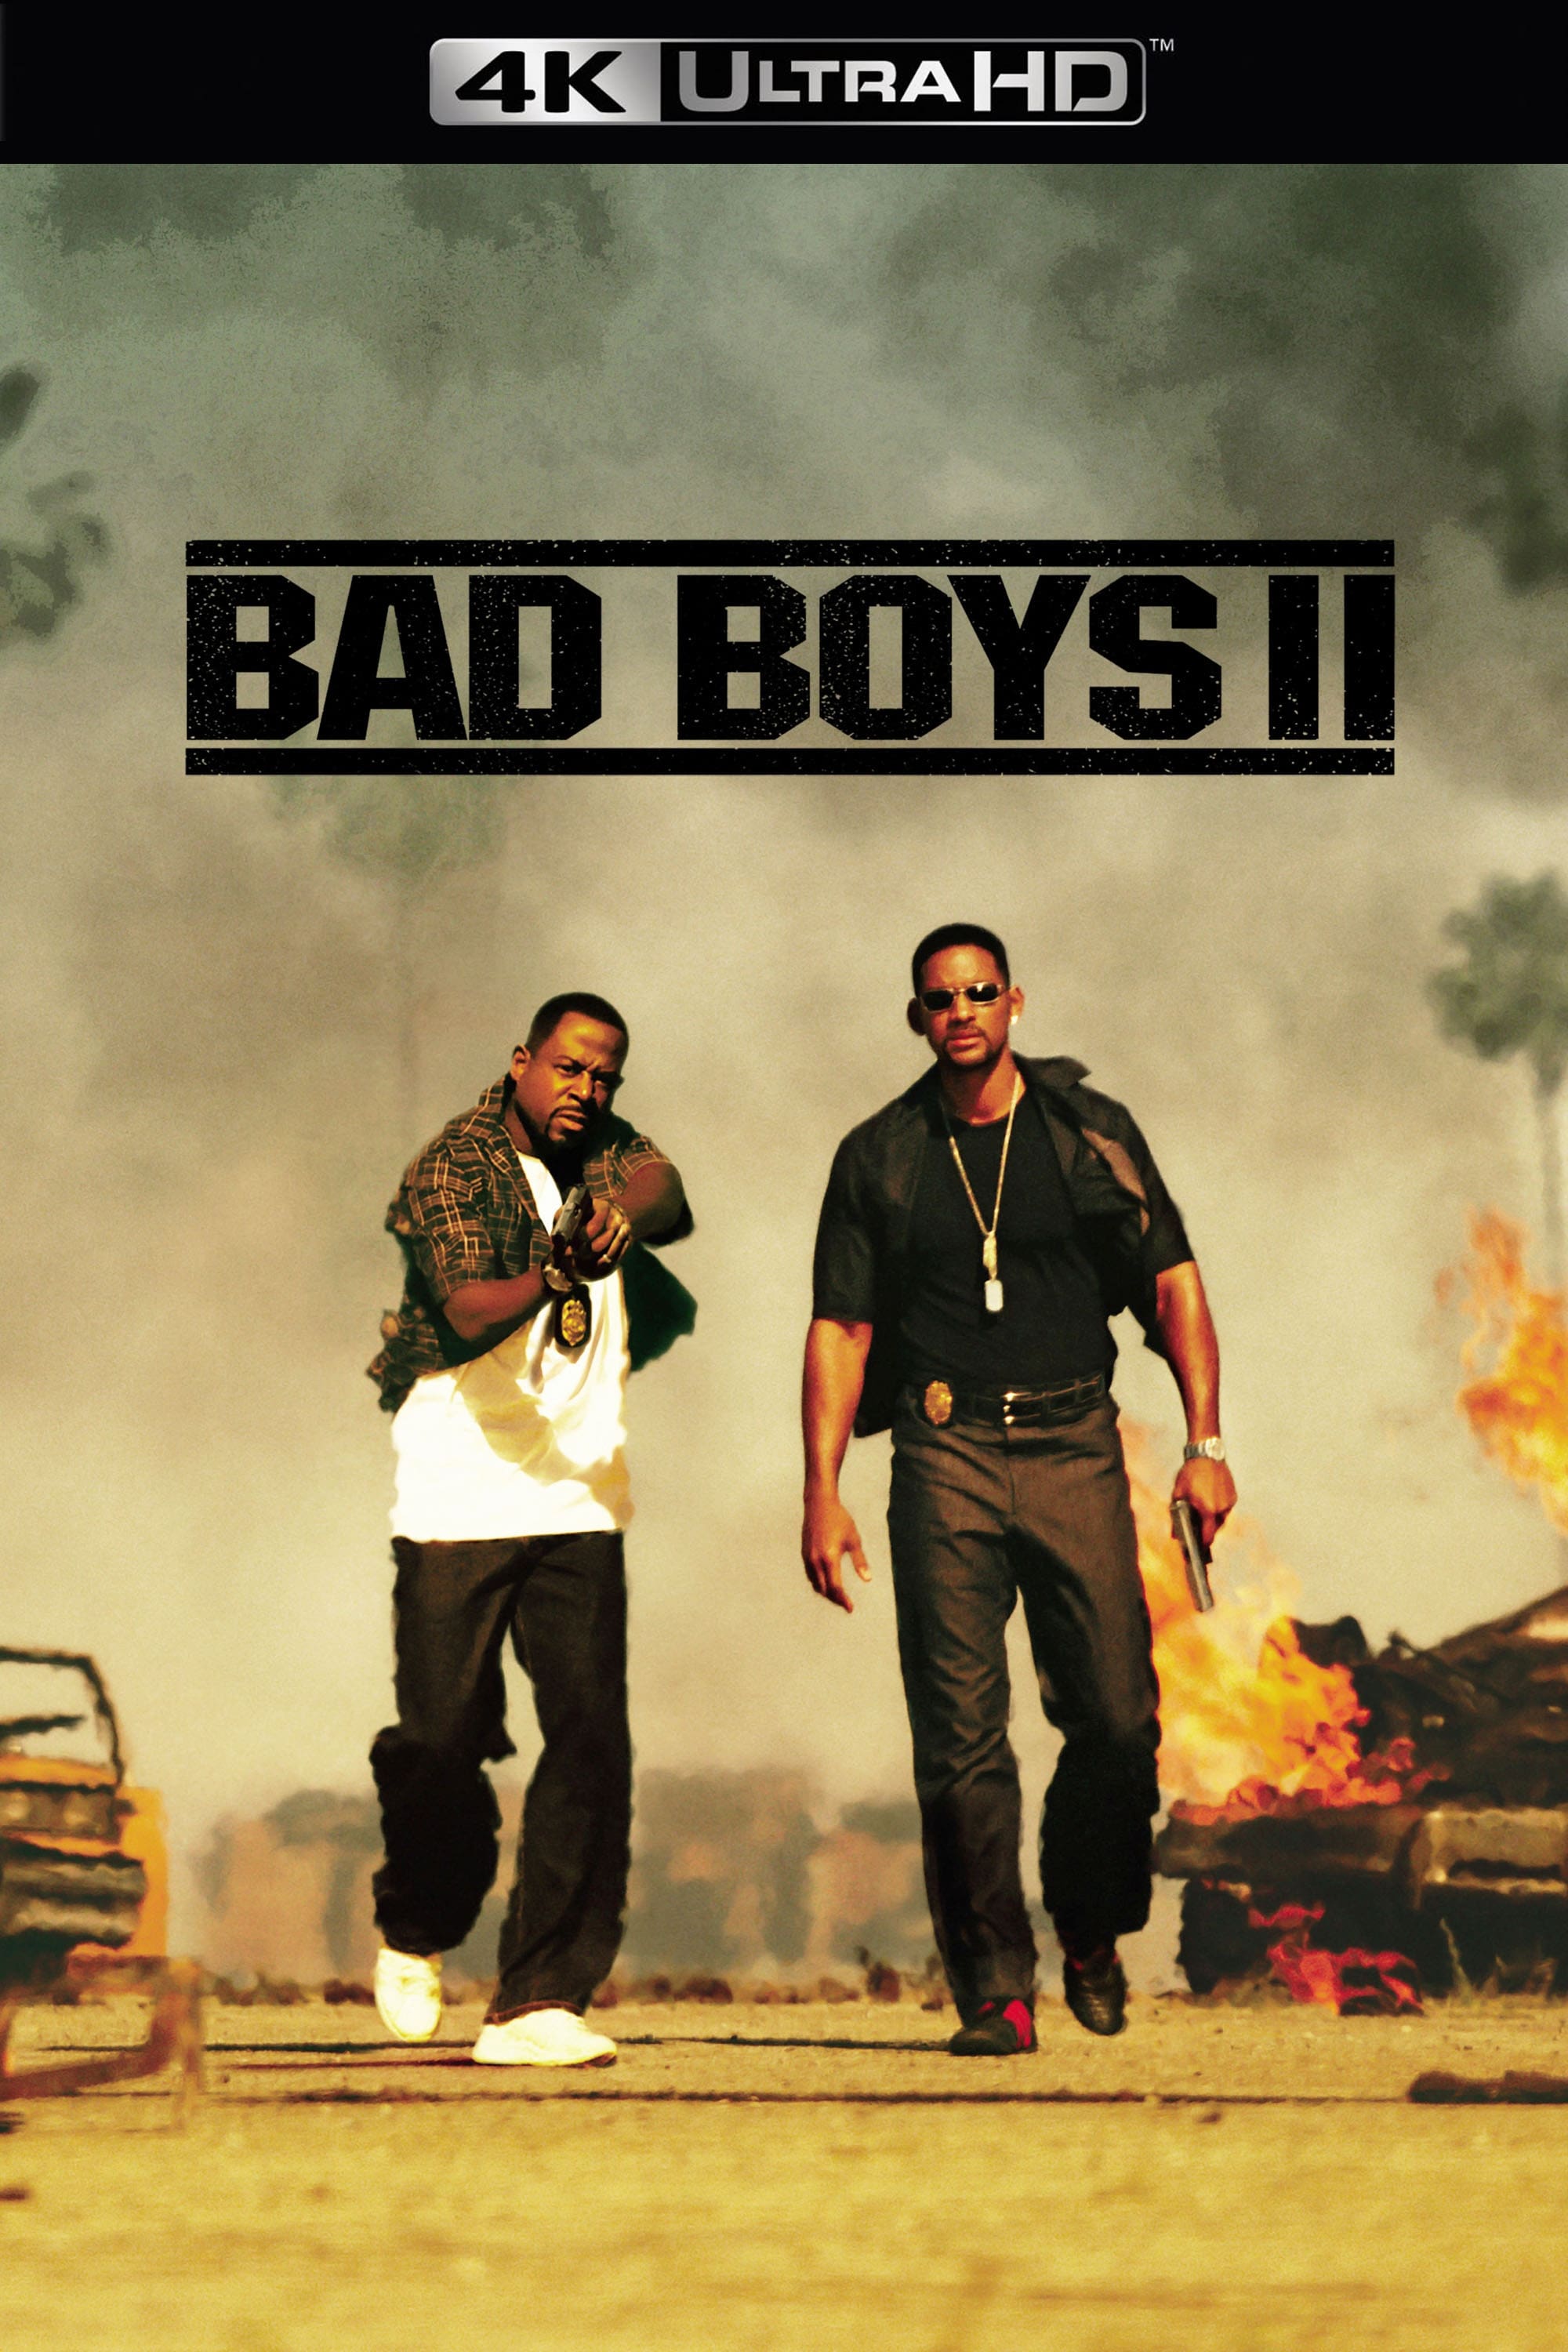 cindy starke recommends bad boys 2 full movie download pic